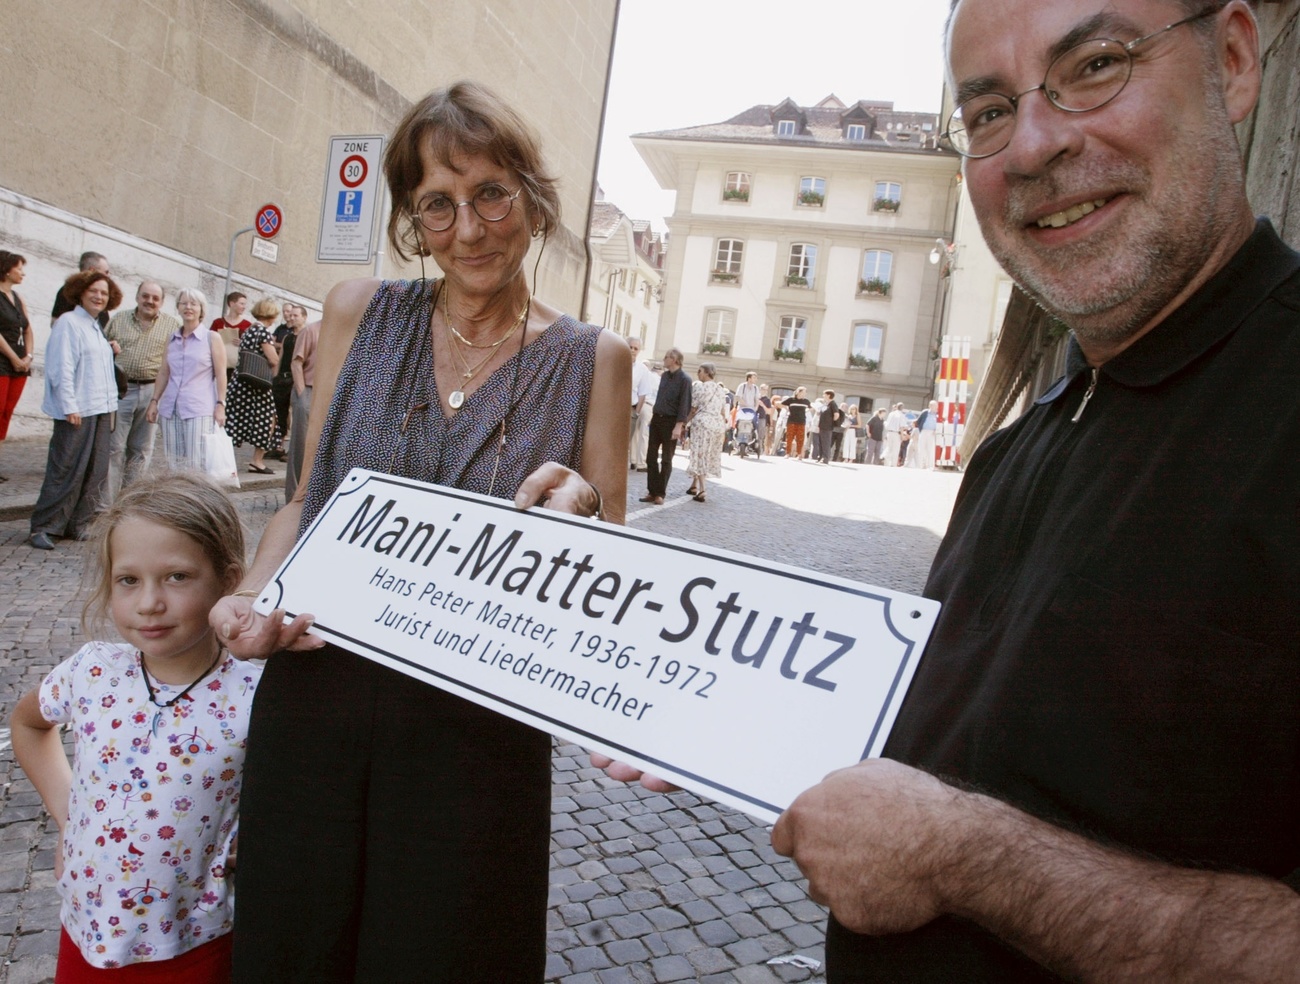 Matter s wife and granddaughter at the inauguration of MM Stutz